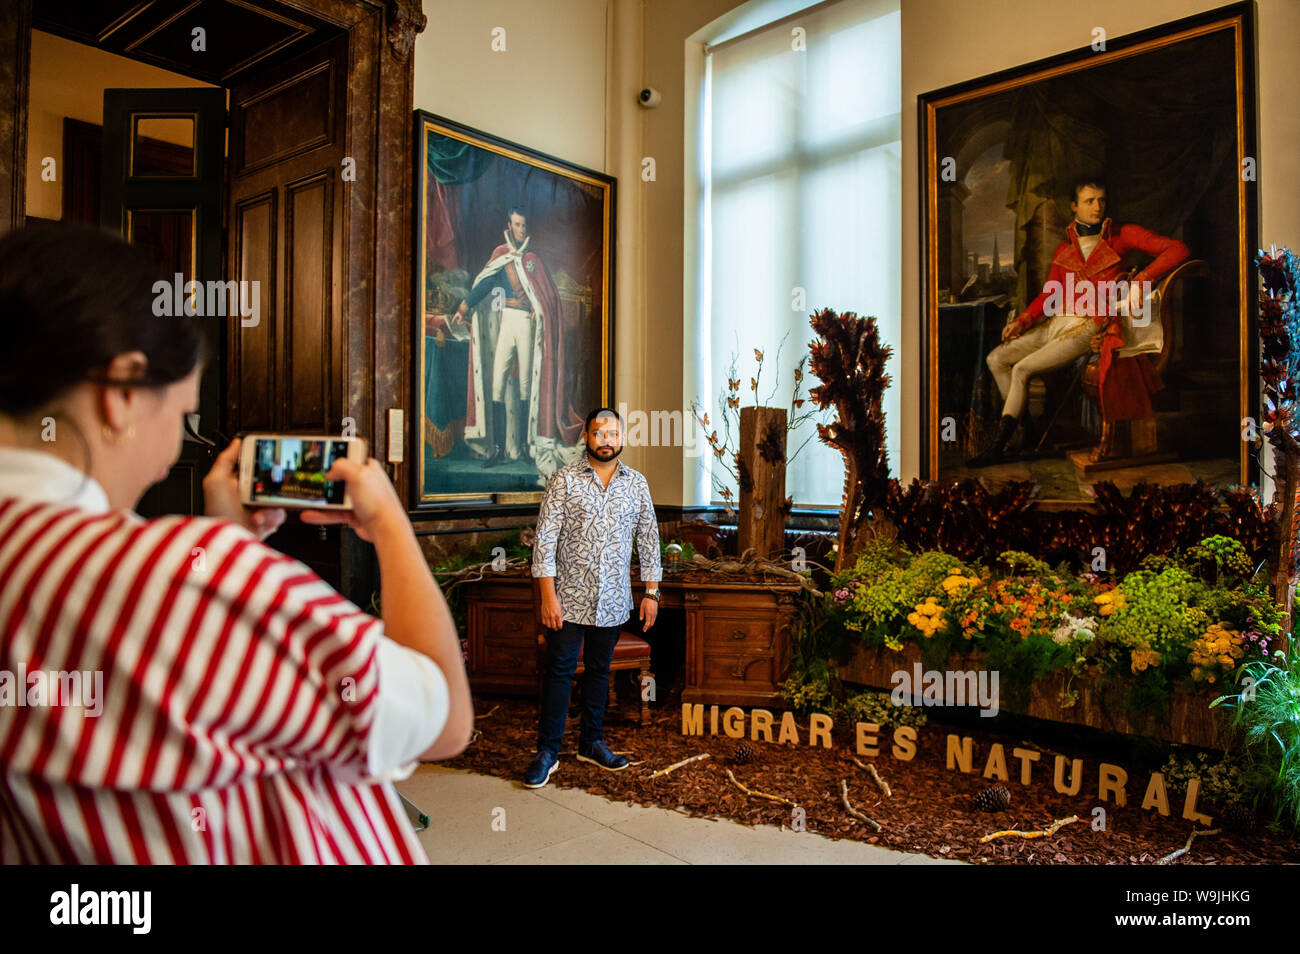 Brussels, North Brabant, Belgium. 14th Aug, 2019. A woman takes a photo of one of the Mexican artists with his floral art during the occasion.Flower time is a biennial initiative that was launched in 2013 by the City of Brussels and the ASBL (non-profit organization) Tapis de Fleurs de Bruxelles. Under the theme 'A World of Floral Emotions', more than 30 top florists from 13 countries decorated the magnificent rooms of Brussels City Hall, a Unesco masterpiece of Gothic architecture. Brussels' famous Grand Place hosted for the occasion a stunning flower arch composed of 500 fuchsias. This y Stock Photo